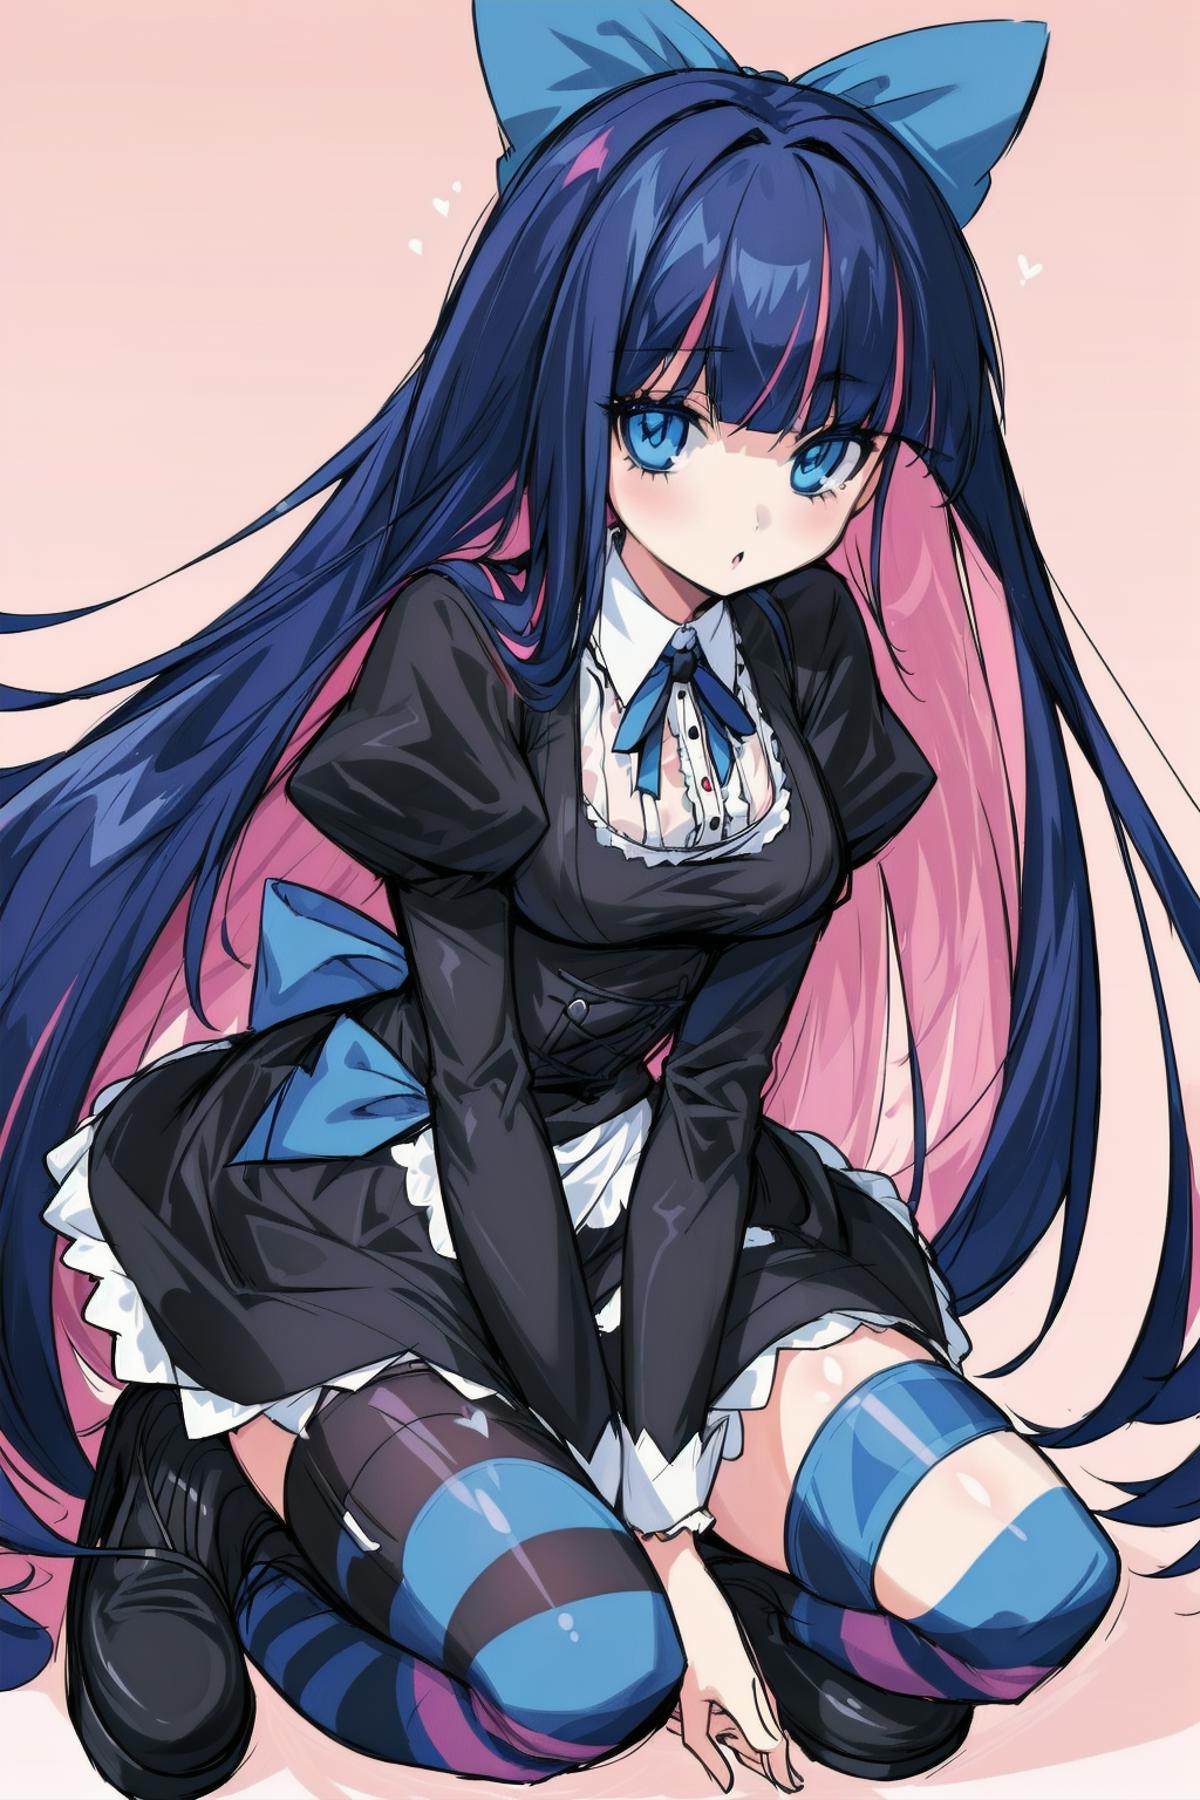 [ArtRaccoonee] Stocking Anarchy (Panty & Stocking with Garterbelt) image by misspixel